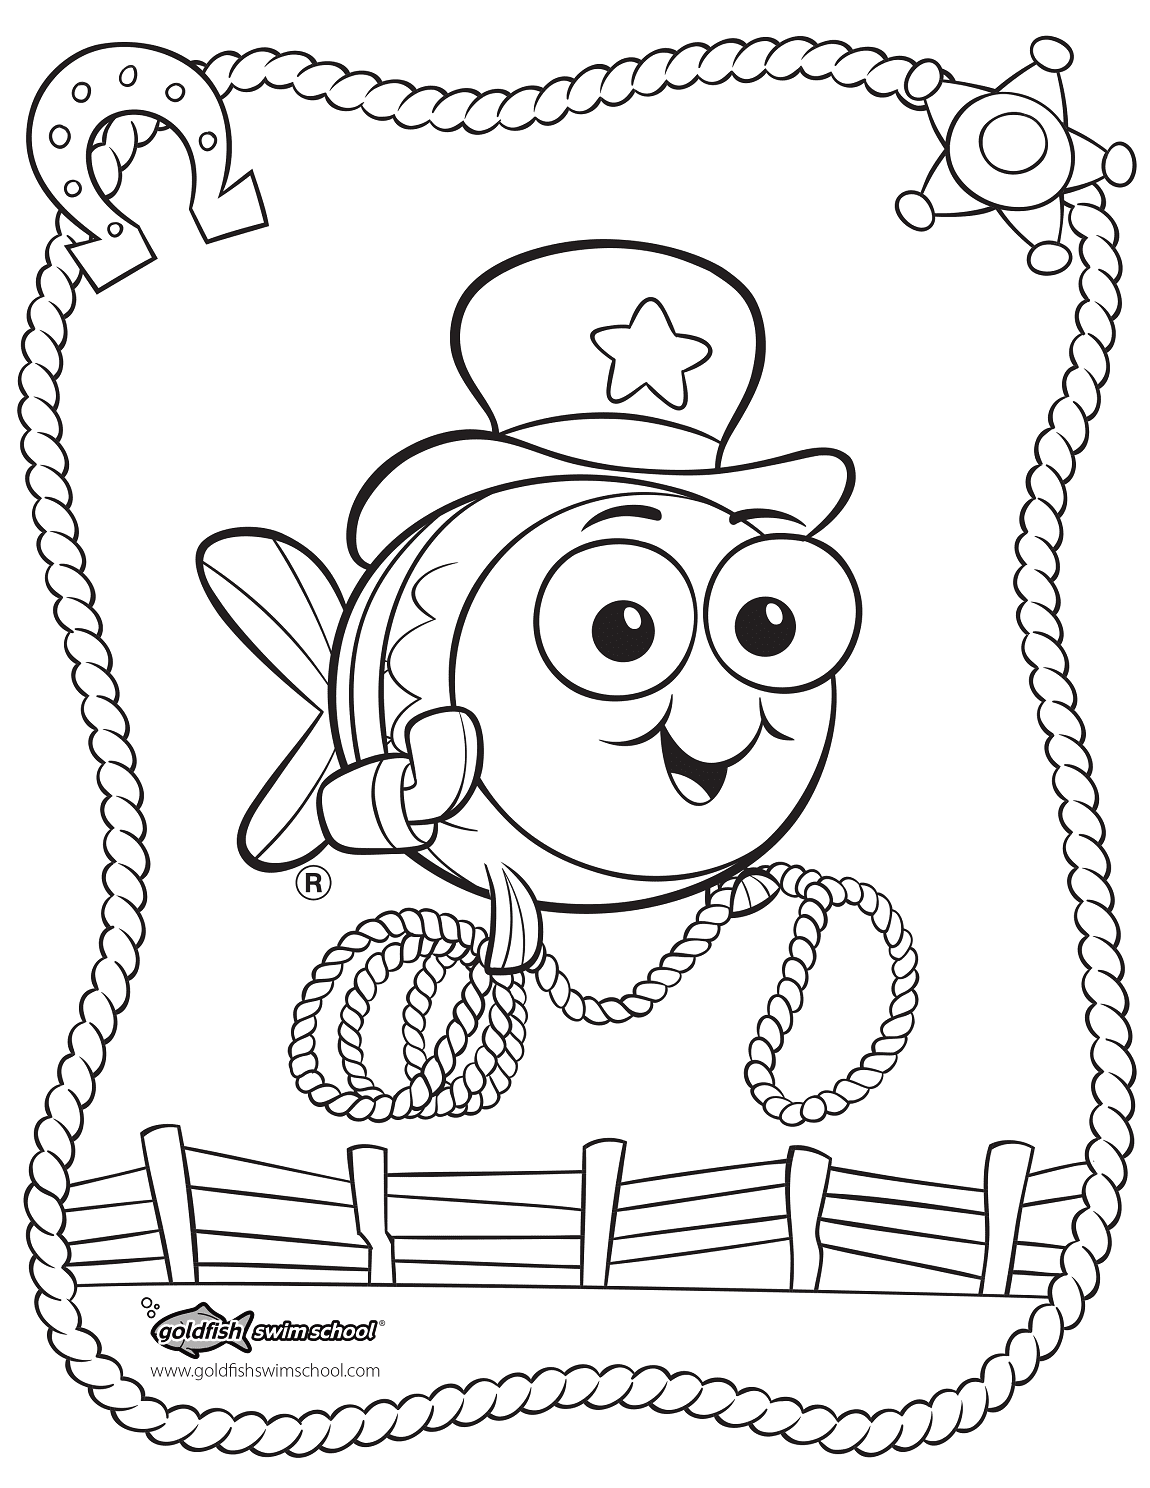 Cute Goldfish for Kids Coloring Page